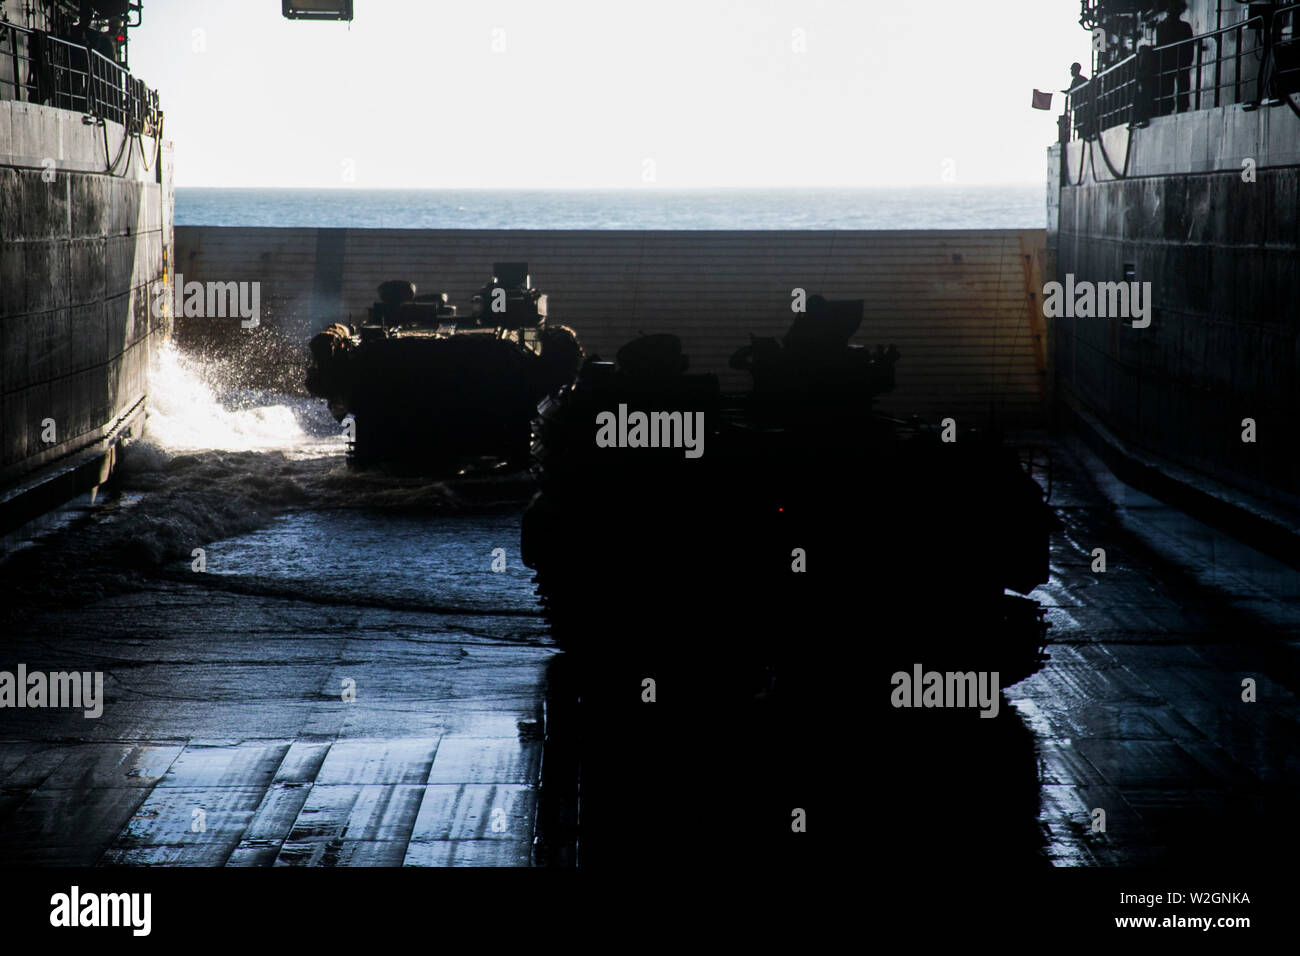 Assault Amphibious Vehicles with Battalion Landing Team, 2nd Battalion, 1st Marines, 31st Marine Expeditionary Unit, prepare for a simulated mechanized raid aboard the amphibious transport dock USS Green Bay (LPD 20), off the Coast of Townshend Island, Queensland Australia, July 1, 2019. Green Bay, part of the Wasp Amphibious Ready Group, with embarked 31st MEU, is operating in the Indo-Pacific region to enhance interoperability with partners and serve as a ready-response force for any type of contingency, while simultaneously providing a flexible and lethal crisis response force ready to perf Stock Photo